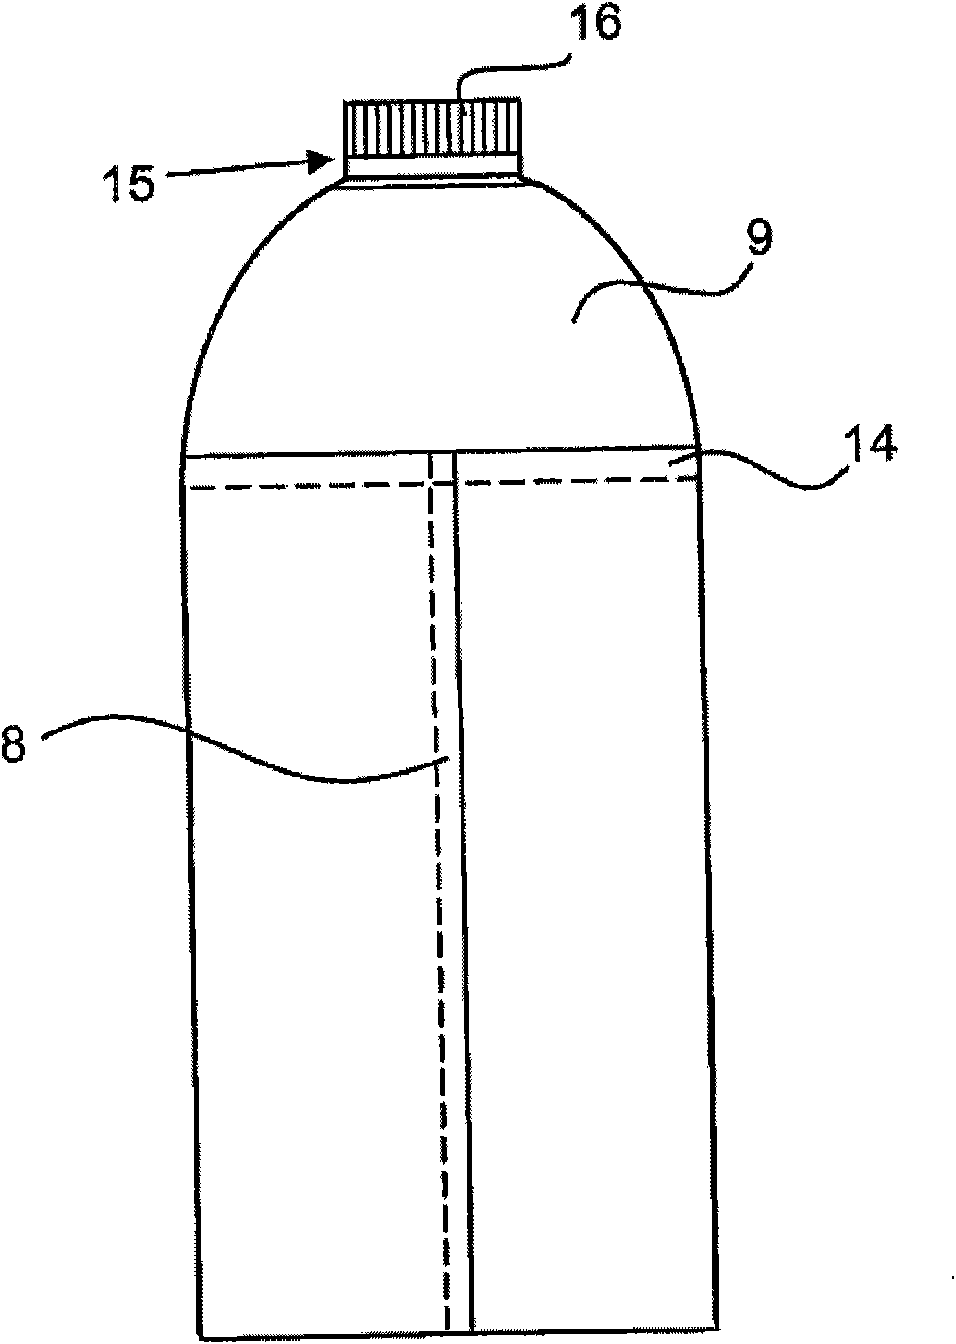 A method and device for producing a packaging container